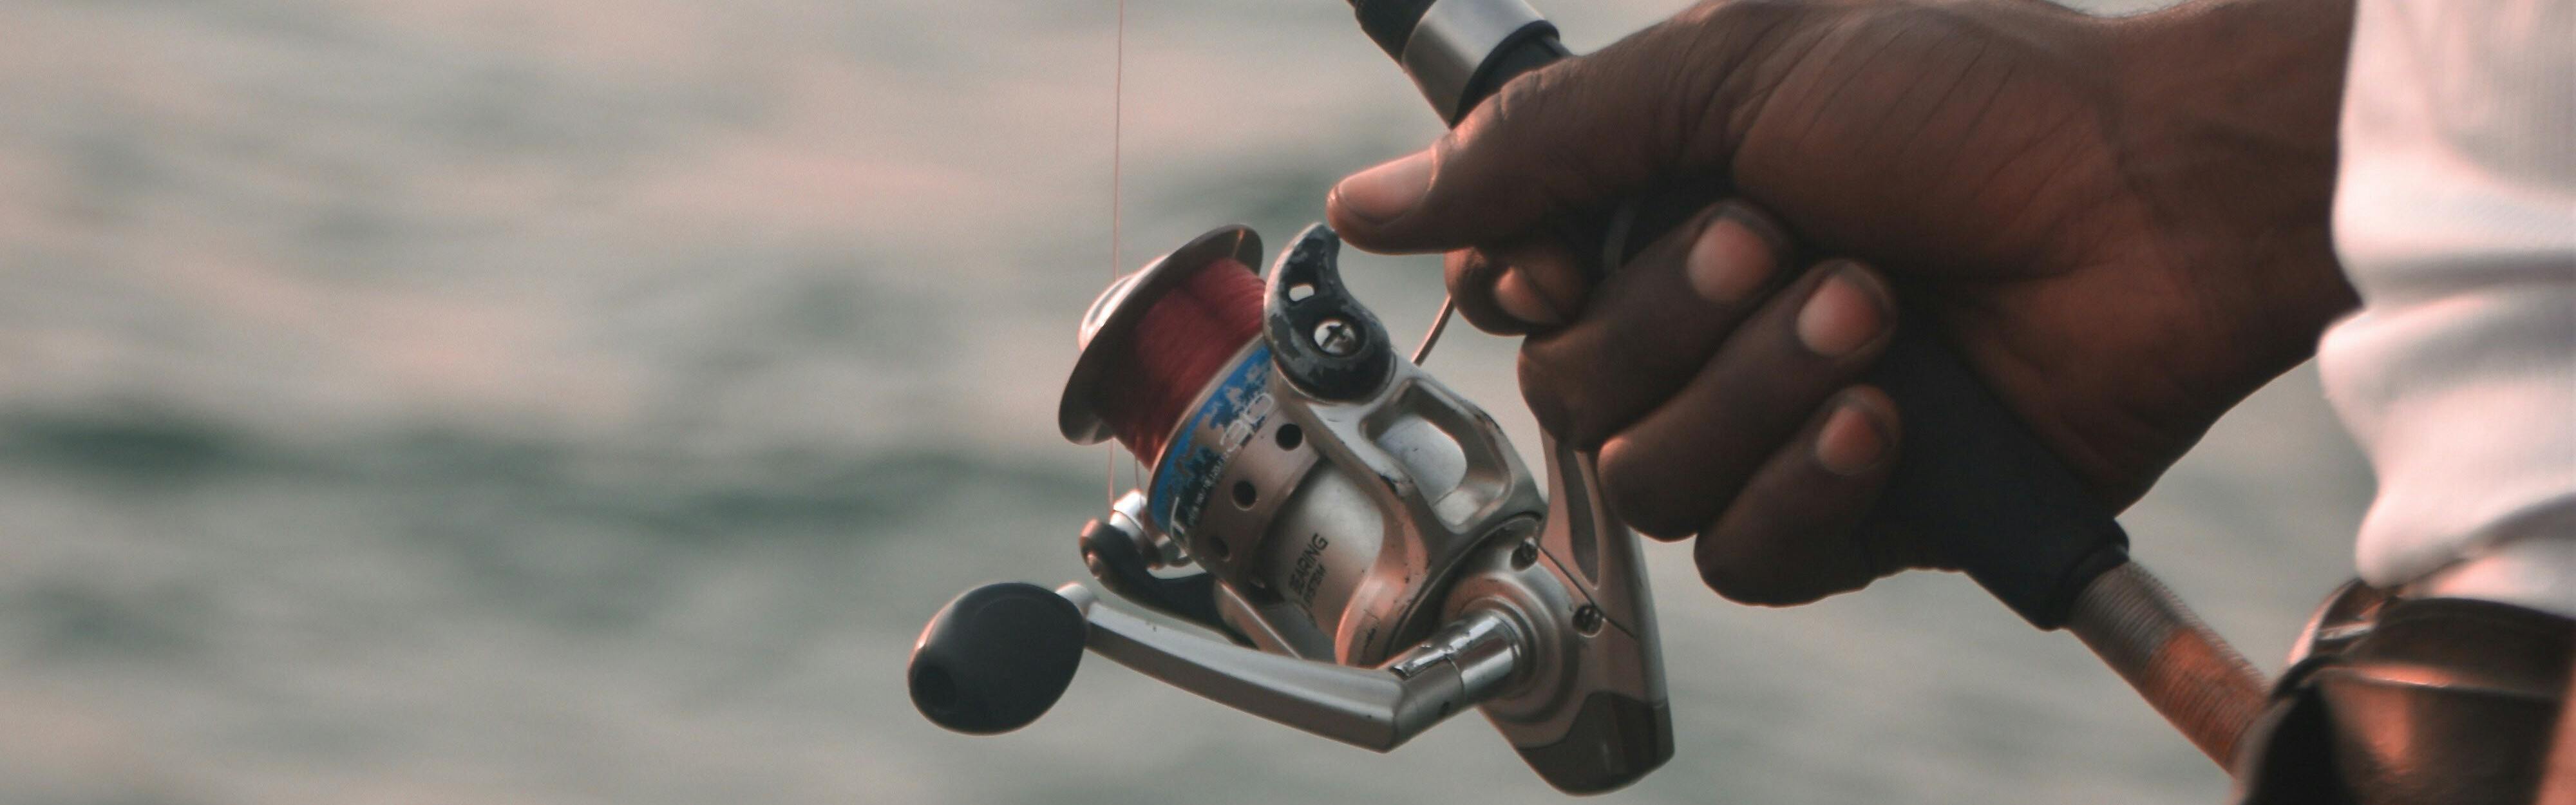 How to Spool a Baitcaster or Spinning Reel for Zero Fishing Line Twist